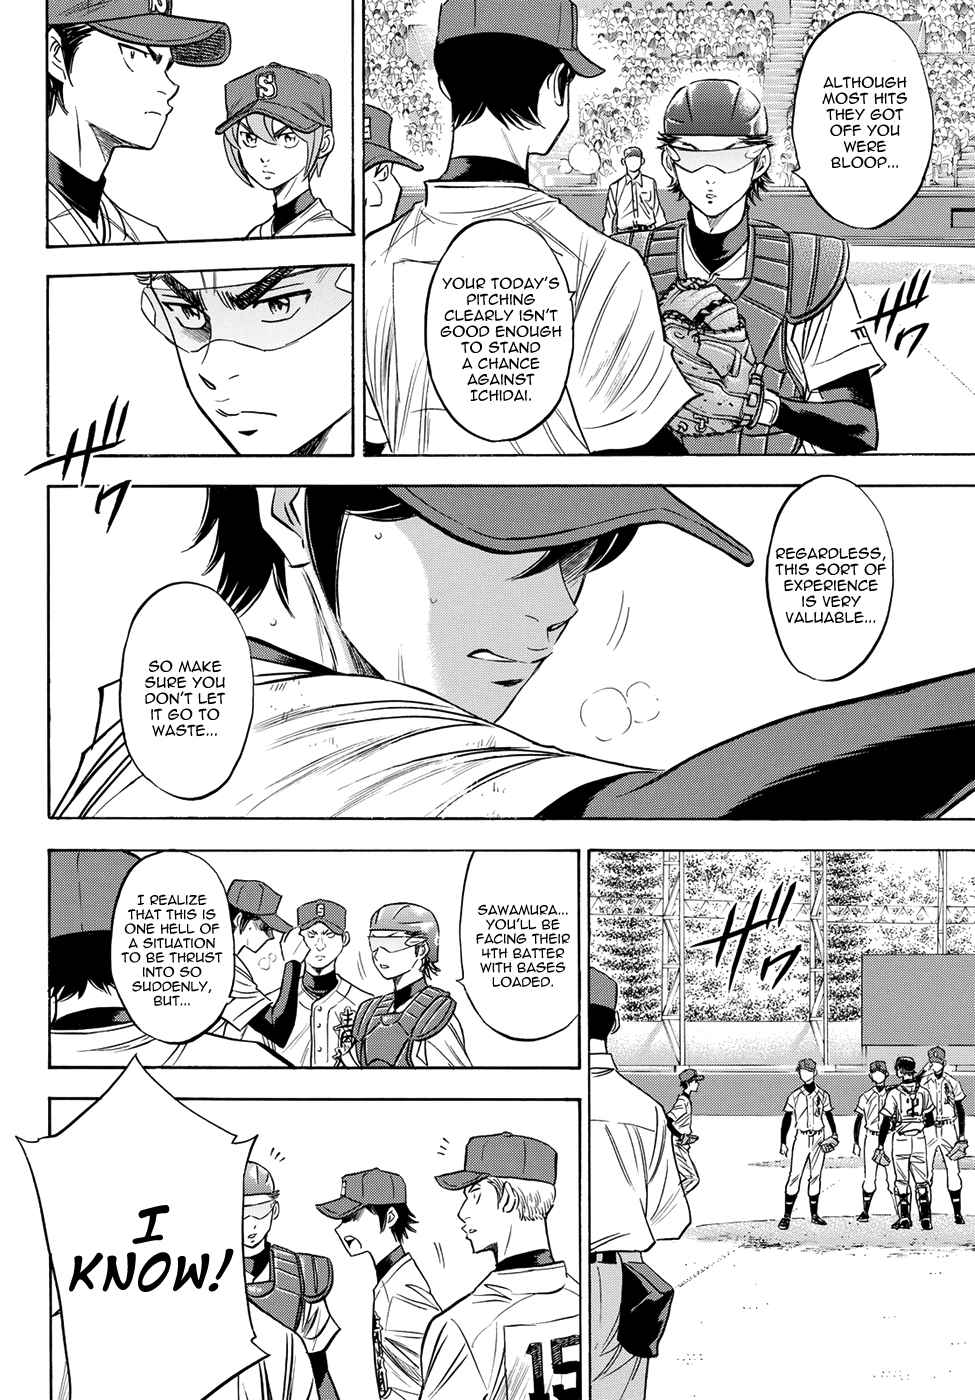 Diamond no Ace Act II Vol. 5 Ch. 42 What Are You Doing?